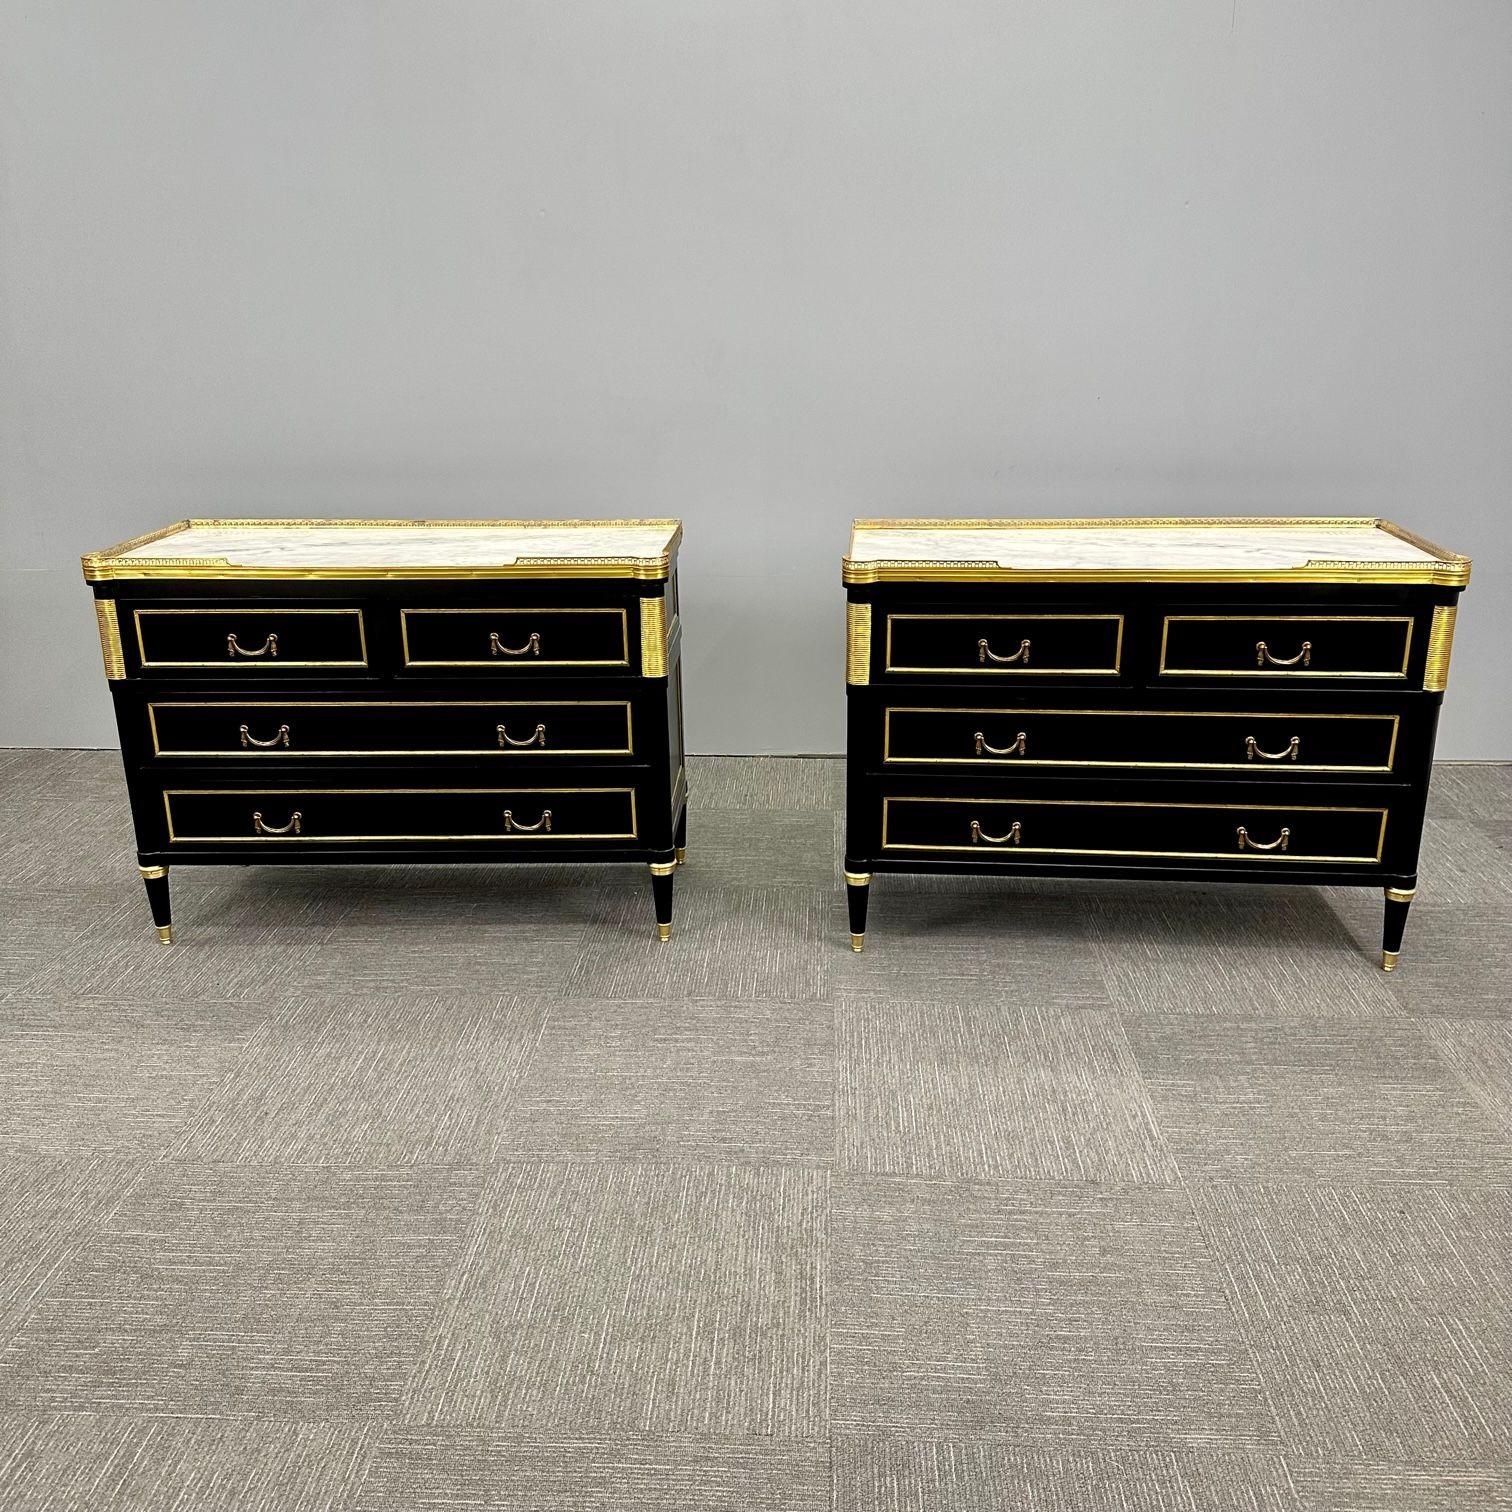 Louis XVI Hollywood Regency Commodes / Nightstands, Maison Jansen Style Black 
 
Pair of Maison Jansen style Hollywood Regency marble top mounted Ebony Commodes or Nightstands. This is a stunning pair of large and impressive paint decorated bronze